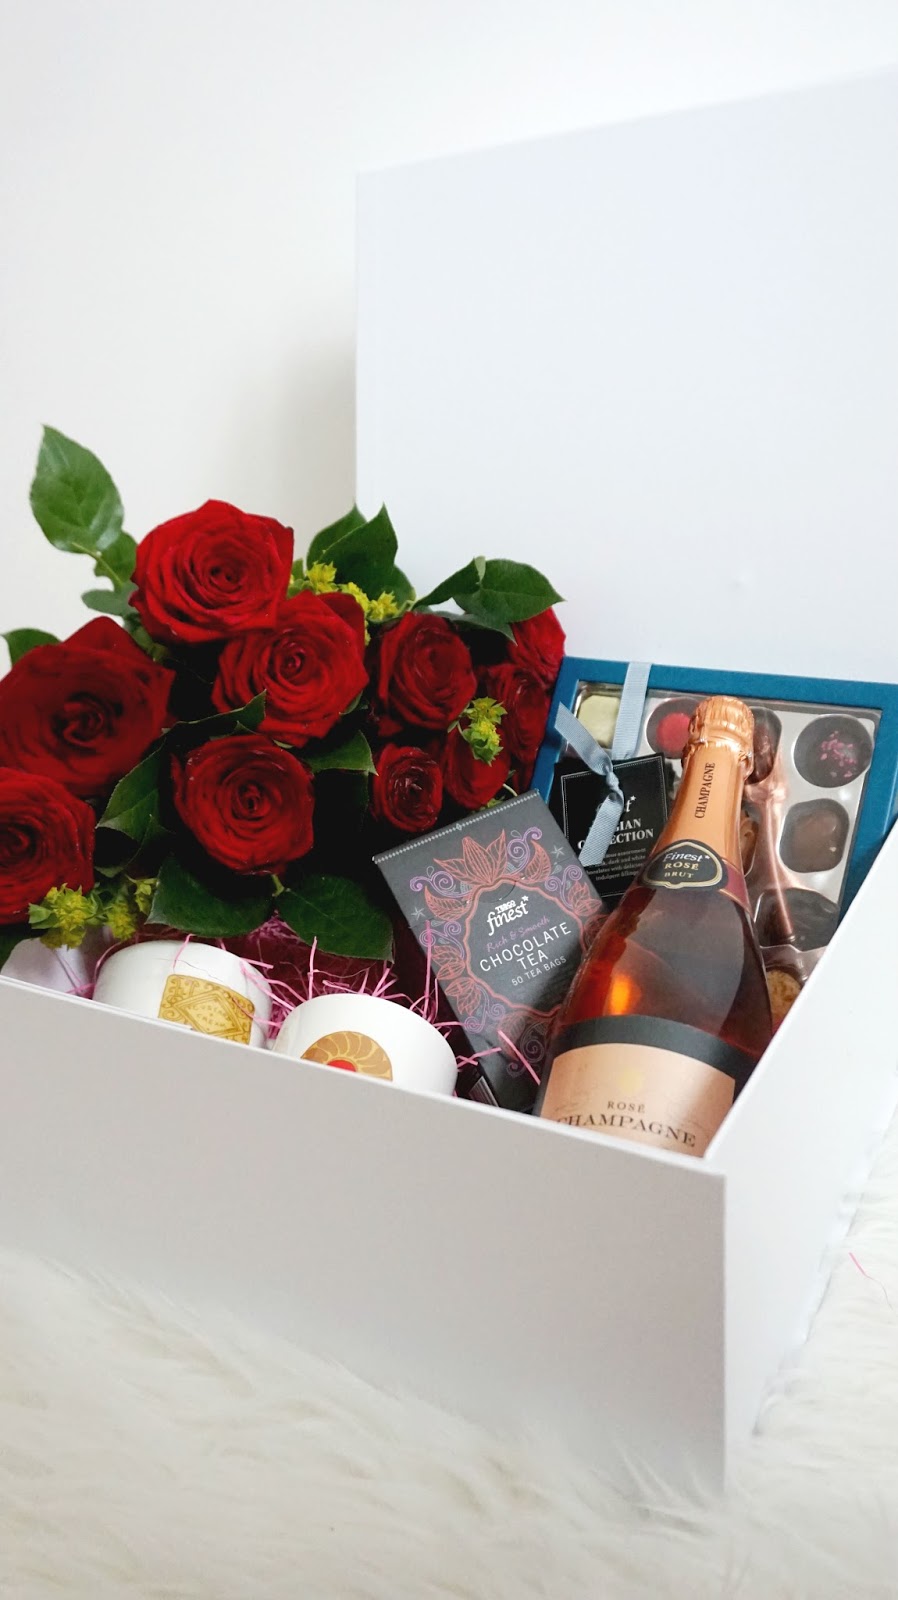 galentines day tesco food hamper flowers best friend champagne chocolate celebrate galentines day photography tesco